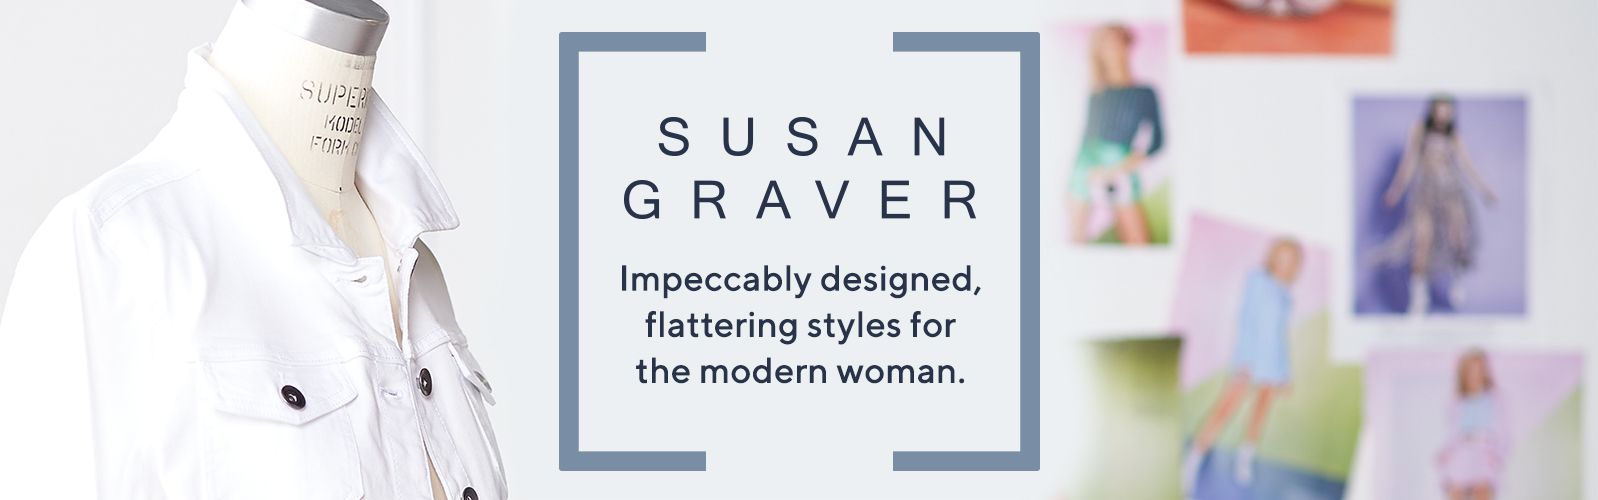 Susan Graver. Impeccably designed, flattering styles for the modern woman.